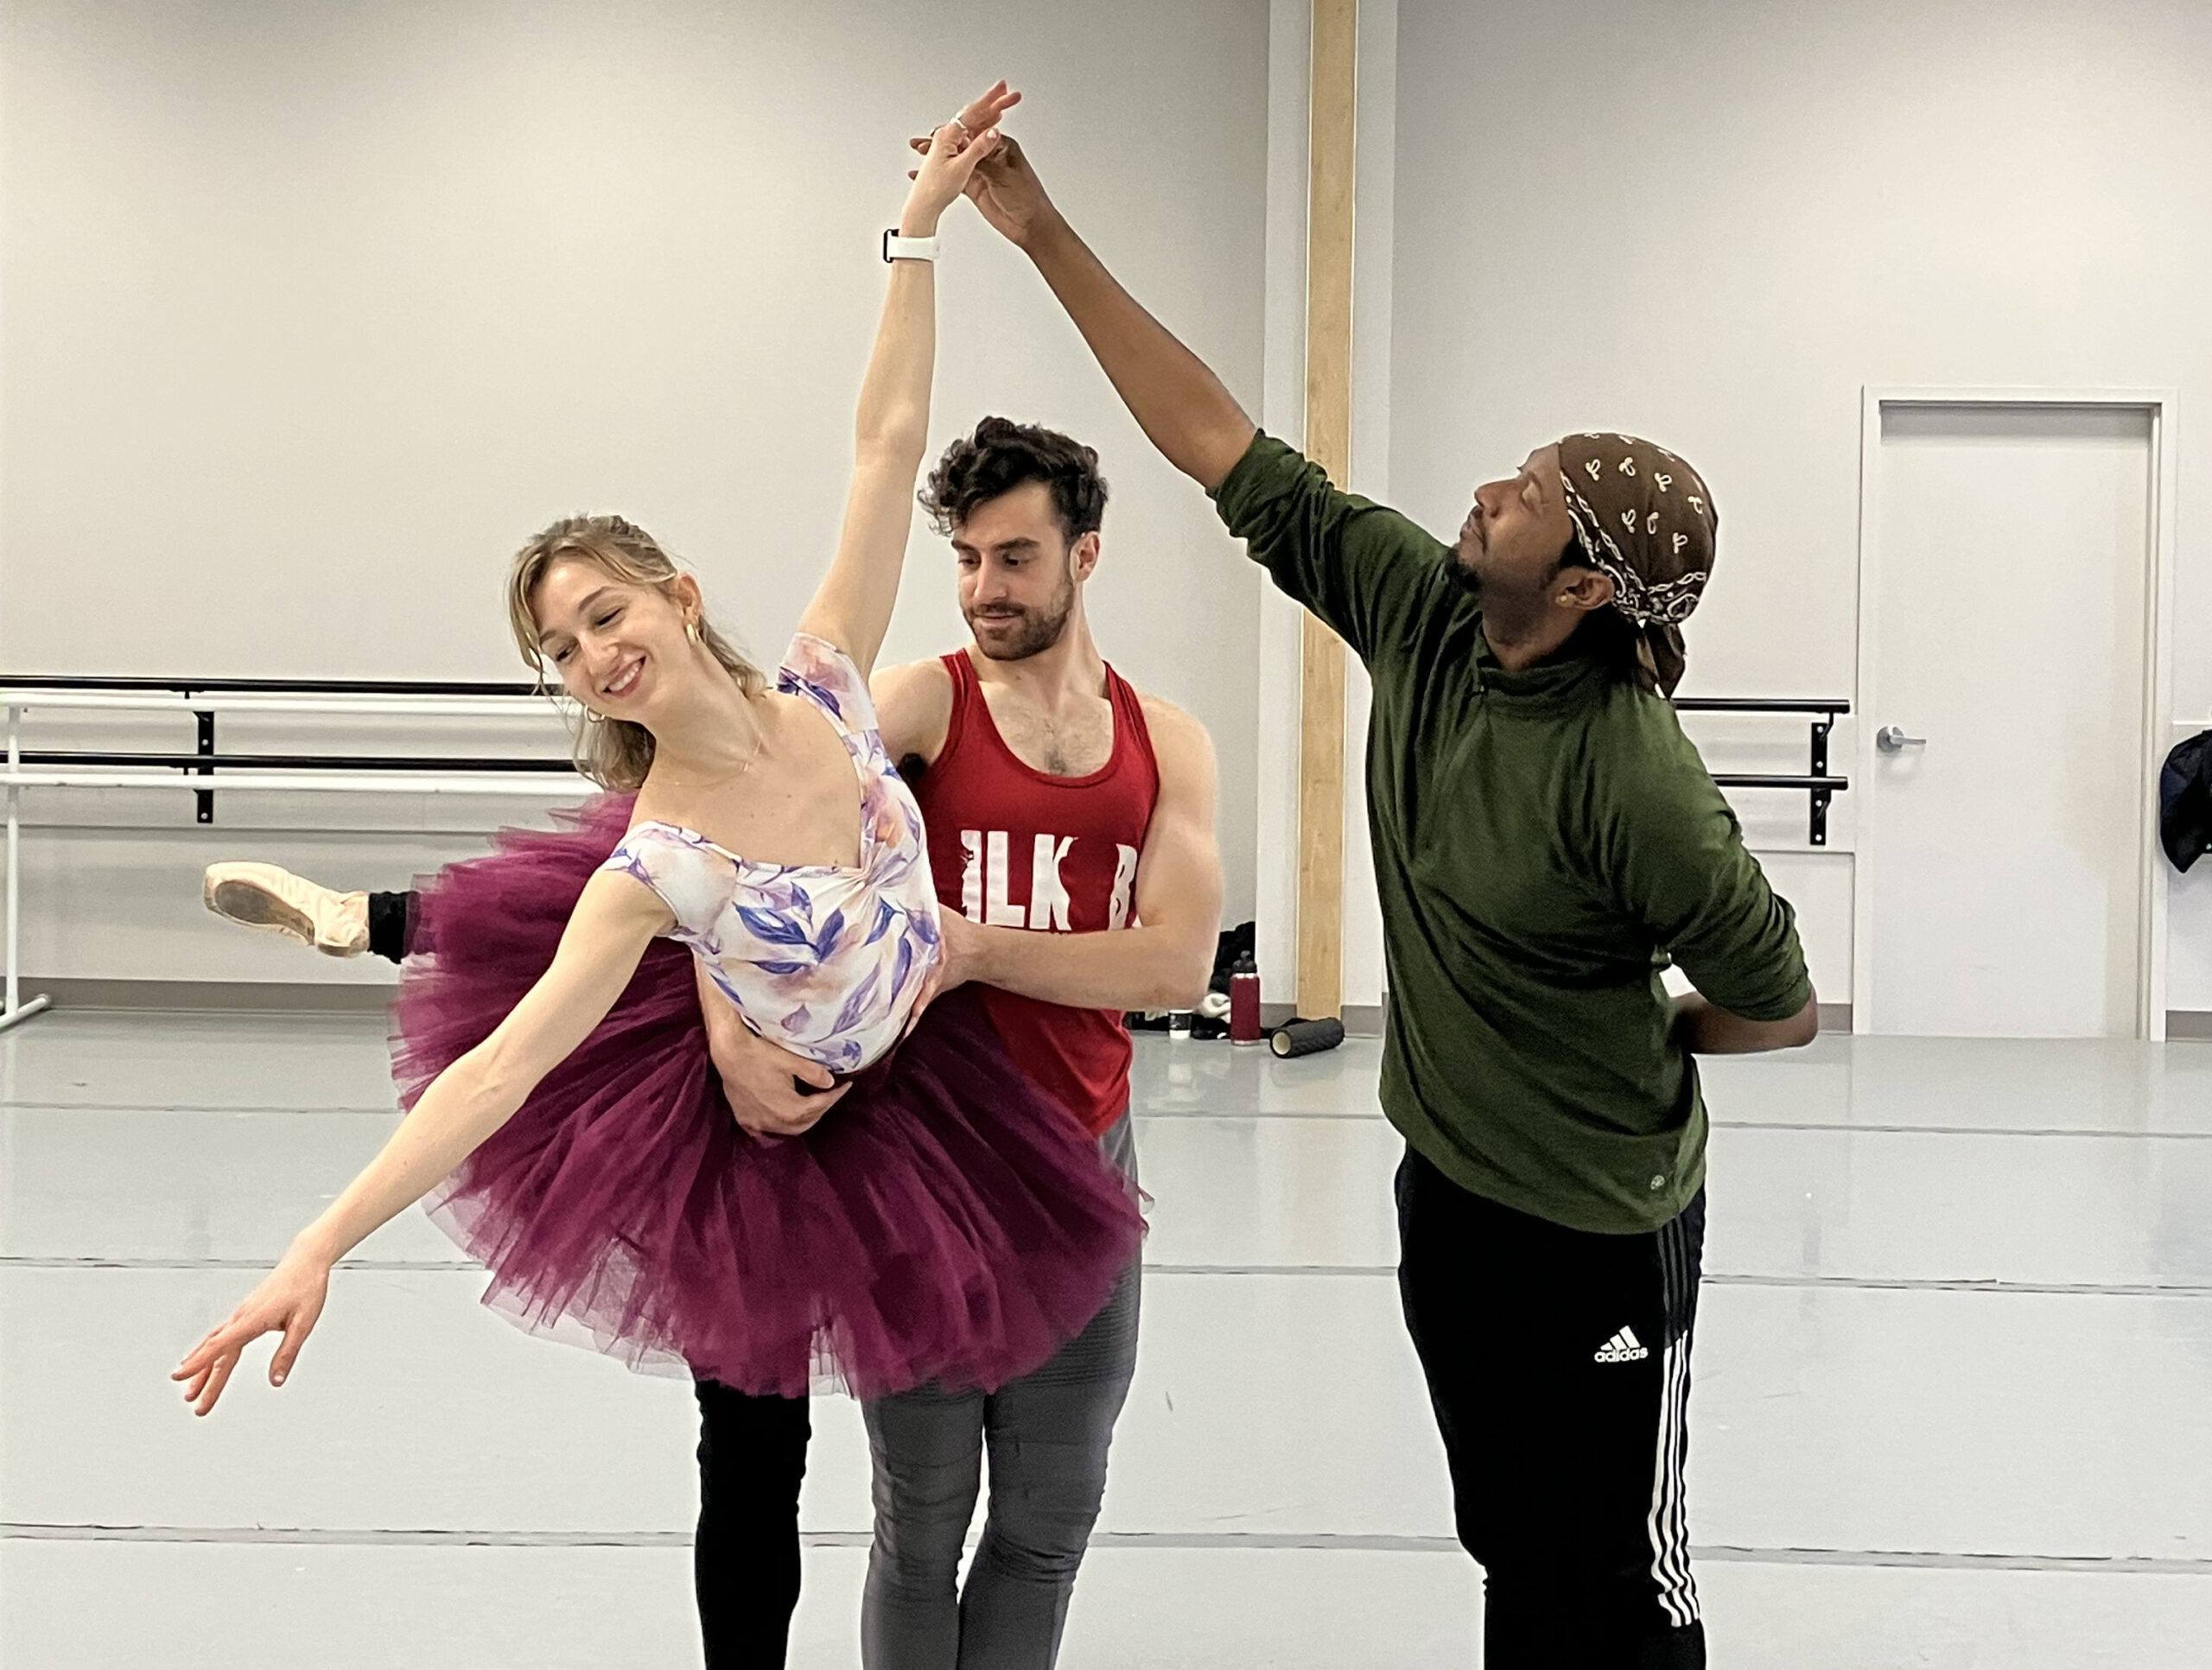 Lucy Hamilton and Lukas Figliozzi practice a partnering move while Jayson Douglas reaches up and adjusts Hamilton's left hand. Hamilton poses in attitude derriere croisé with her left leg lifted as Figgliozzi stands on her left side and holds her around the waist with both hands. She wears a burgundy practice tutu, black legwarmers, pointe shoes and a white leotard with purple flowers. Figliozzi wears a red sleeveless T-shirt and gray tights, while Douglas wears a green long-sleeved shirt, black athletic pants, and a brown bandana around his head.